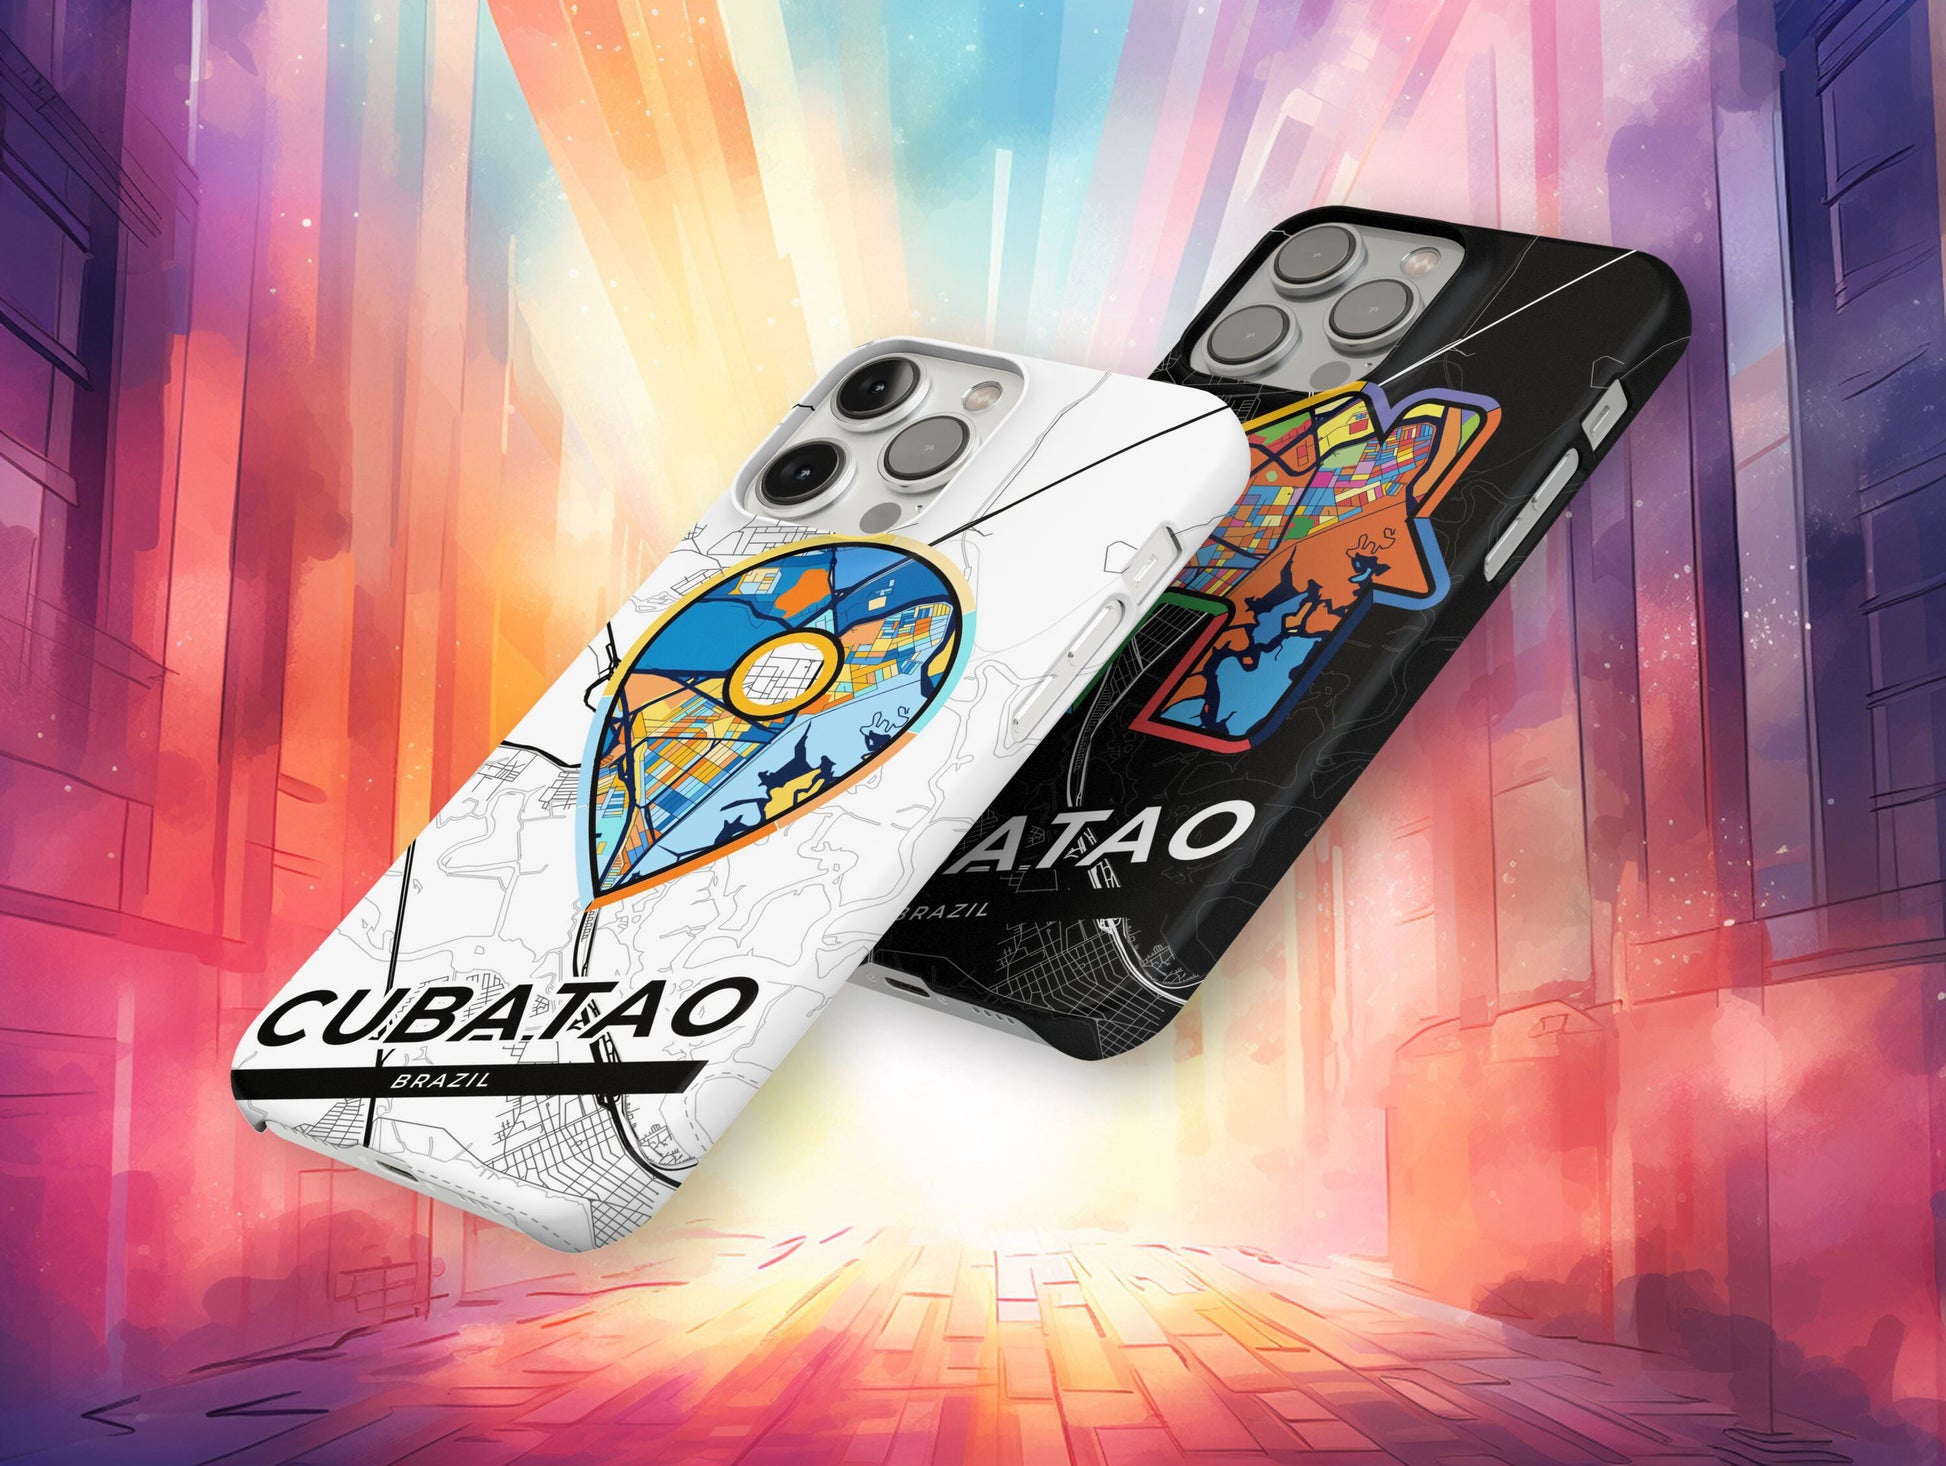 Cubatao Brazil slim phone case with colorful icon. Birthday, wedding or housewarming gift. Couple match cases.